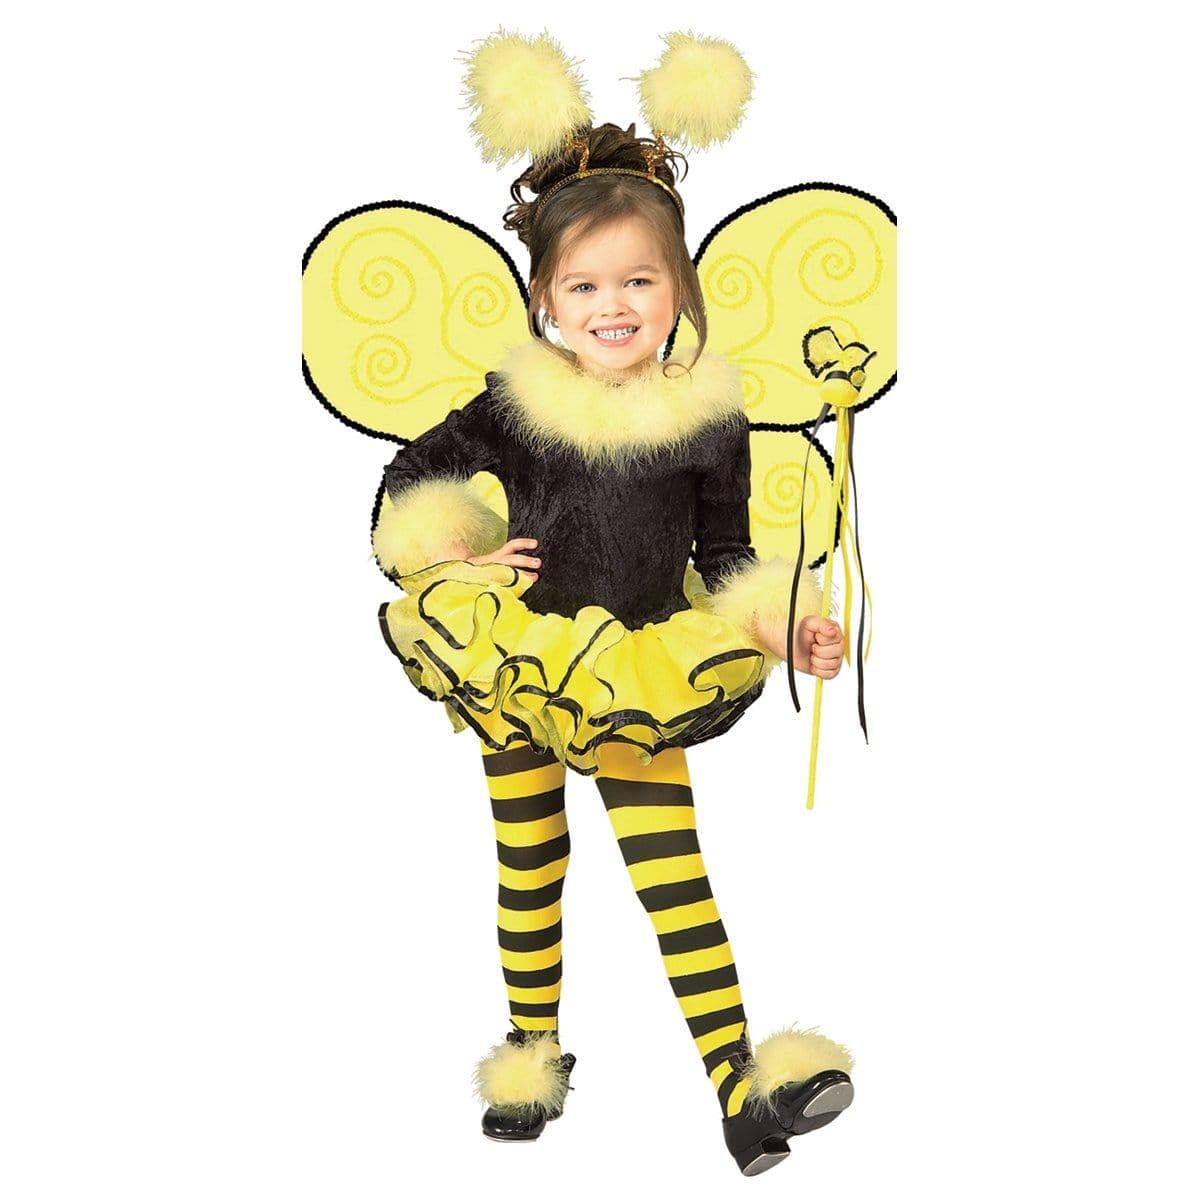 Buy Costumes Bumble bee costume for toddlers sold at Party Expert